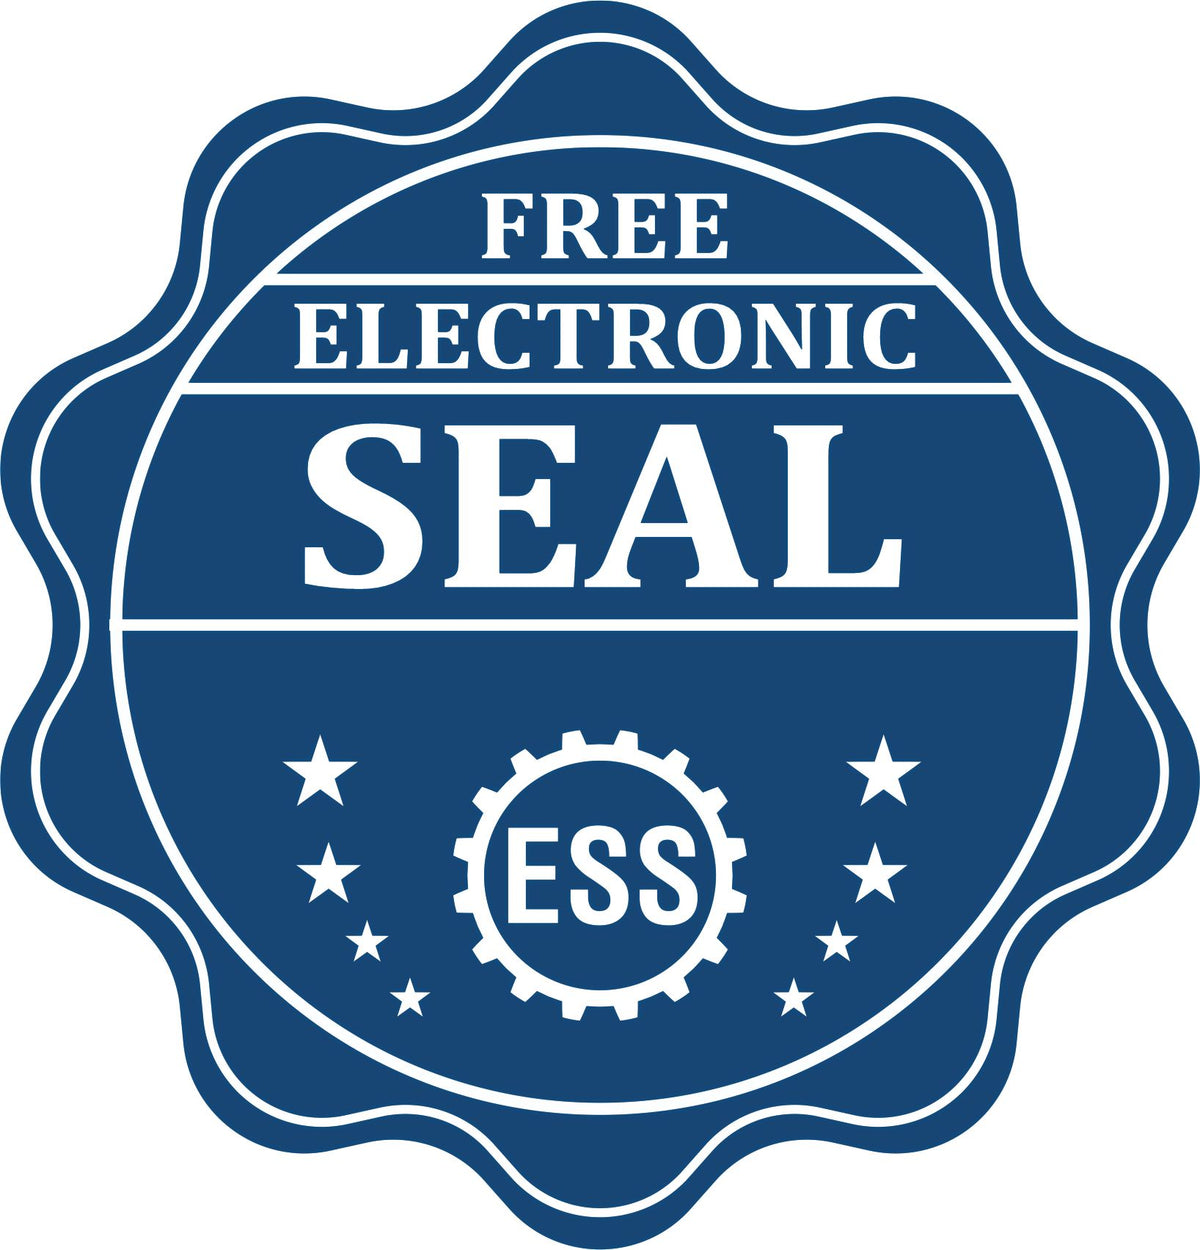 A badge showing a free electronic seal for the New Hampshire Engineer Desk Seal with stars and the ESS gear on the emblem.